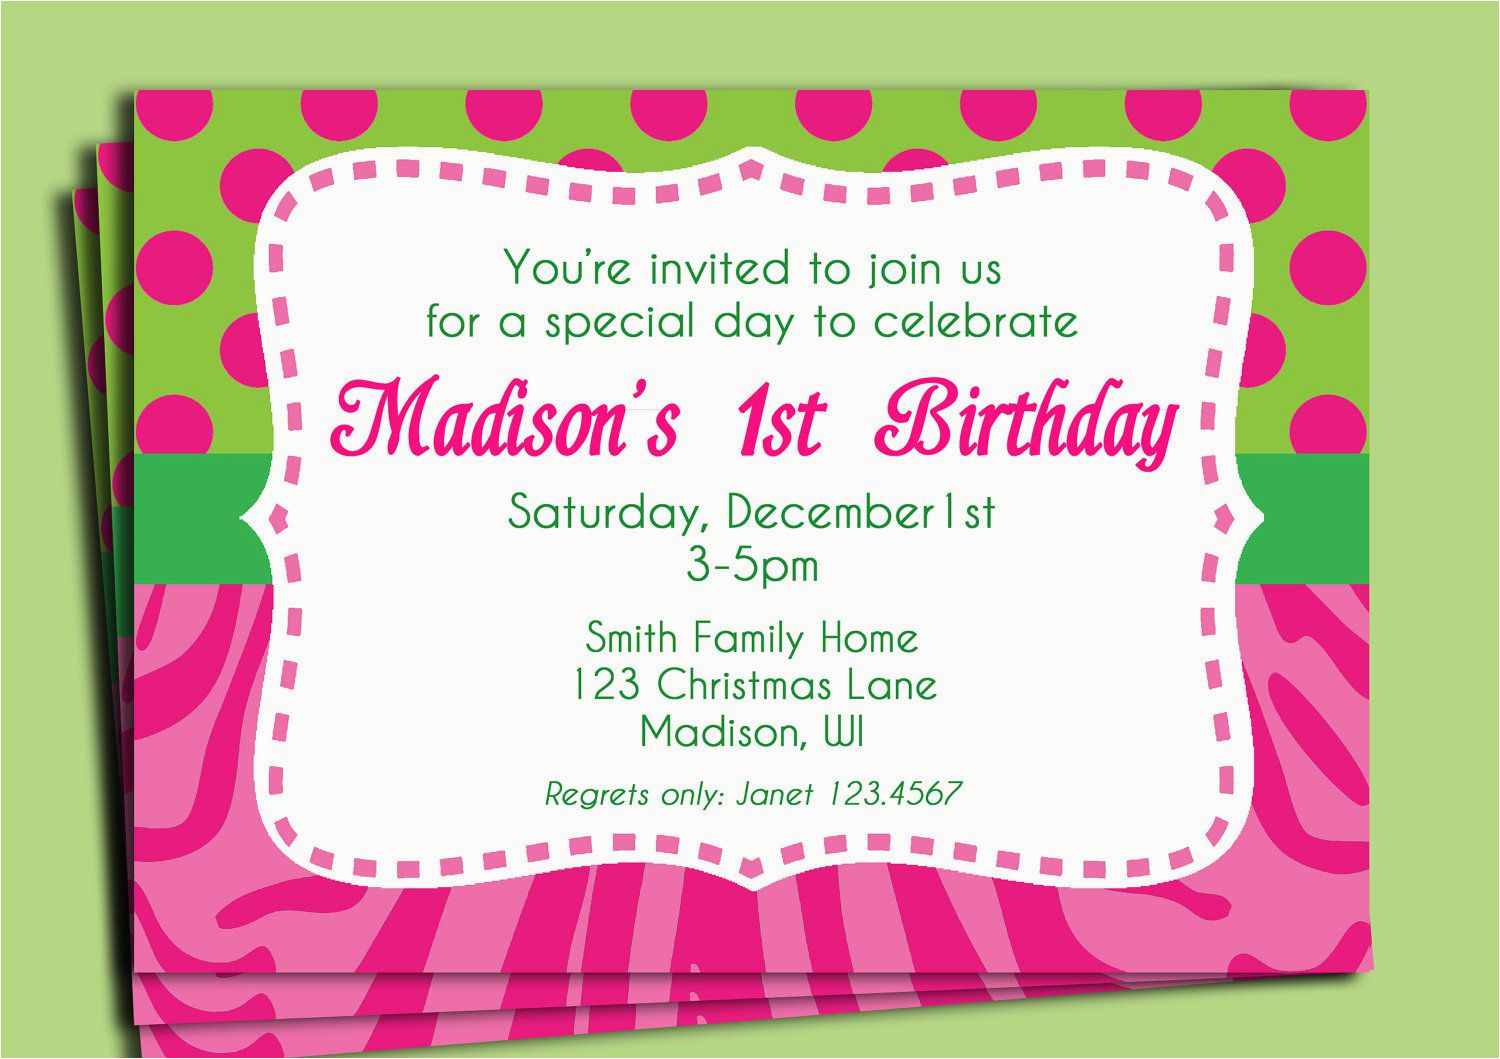 Invitation Cards for Birthday Party Wordings Birthday Invitation Wording Birthday Invitation Wording